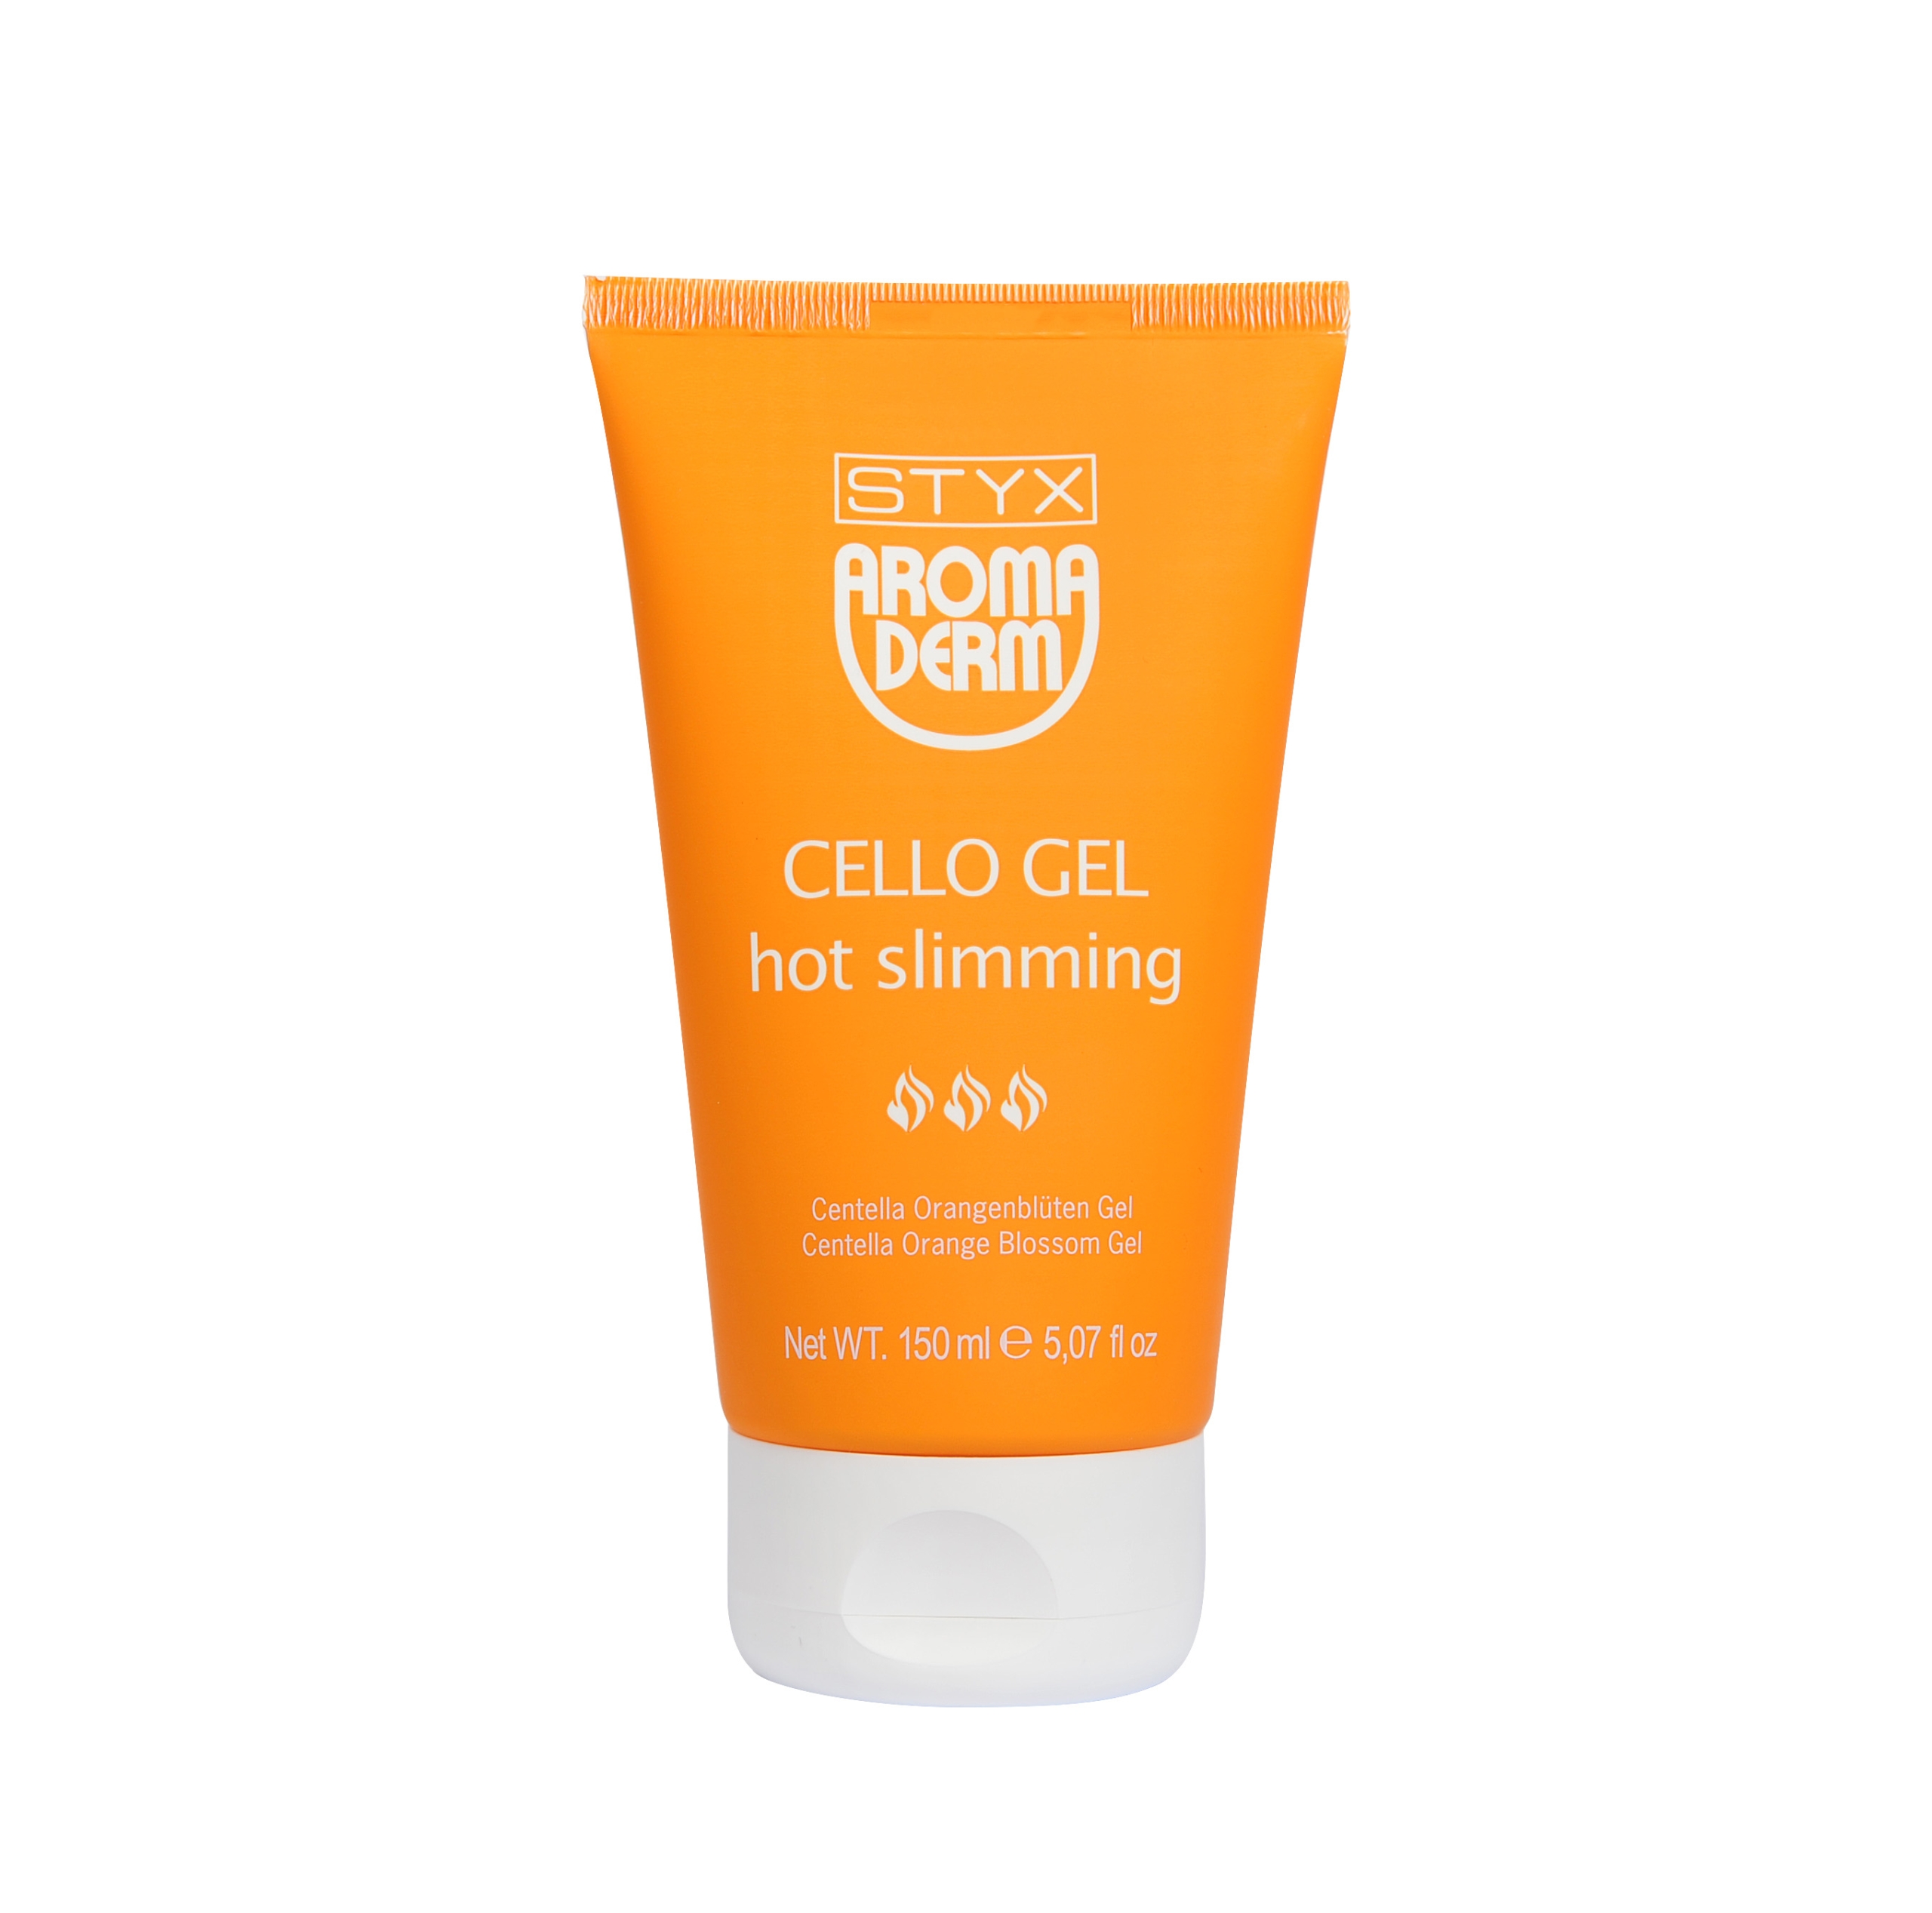 43063-CELLO-GEL-hot-slimming-scaled